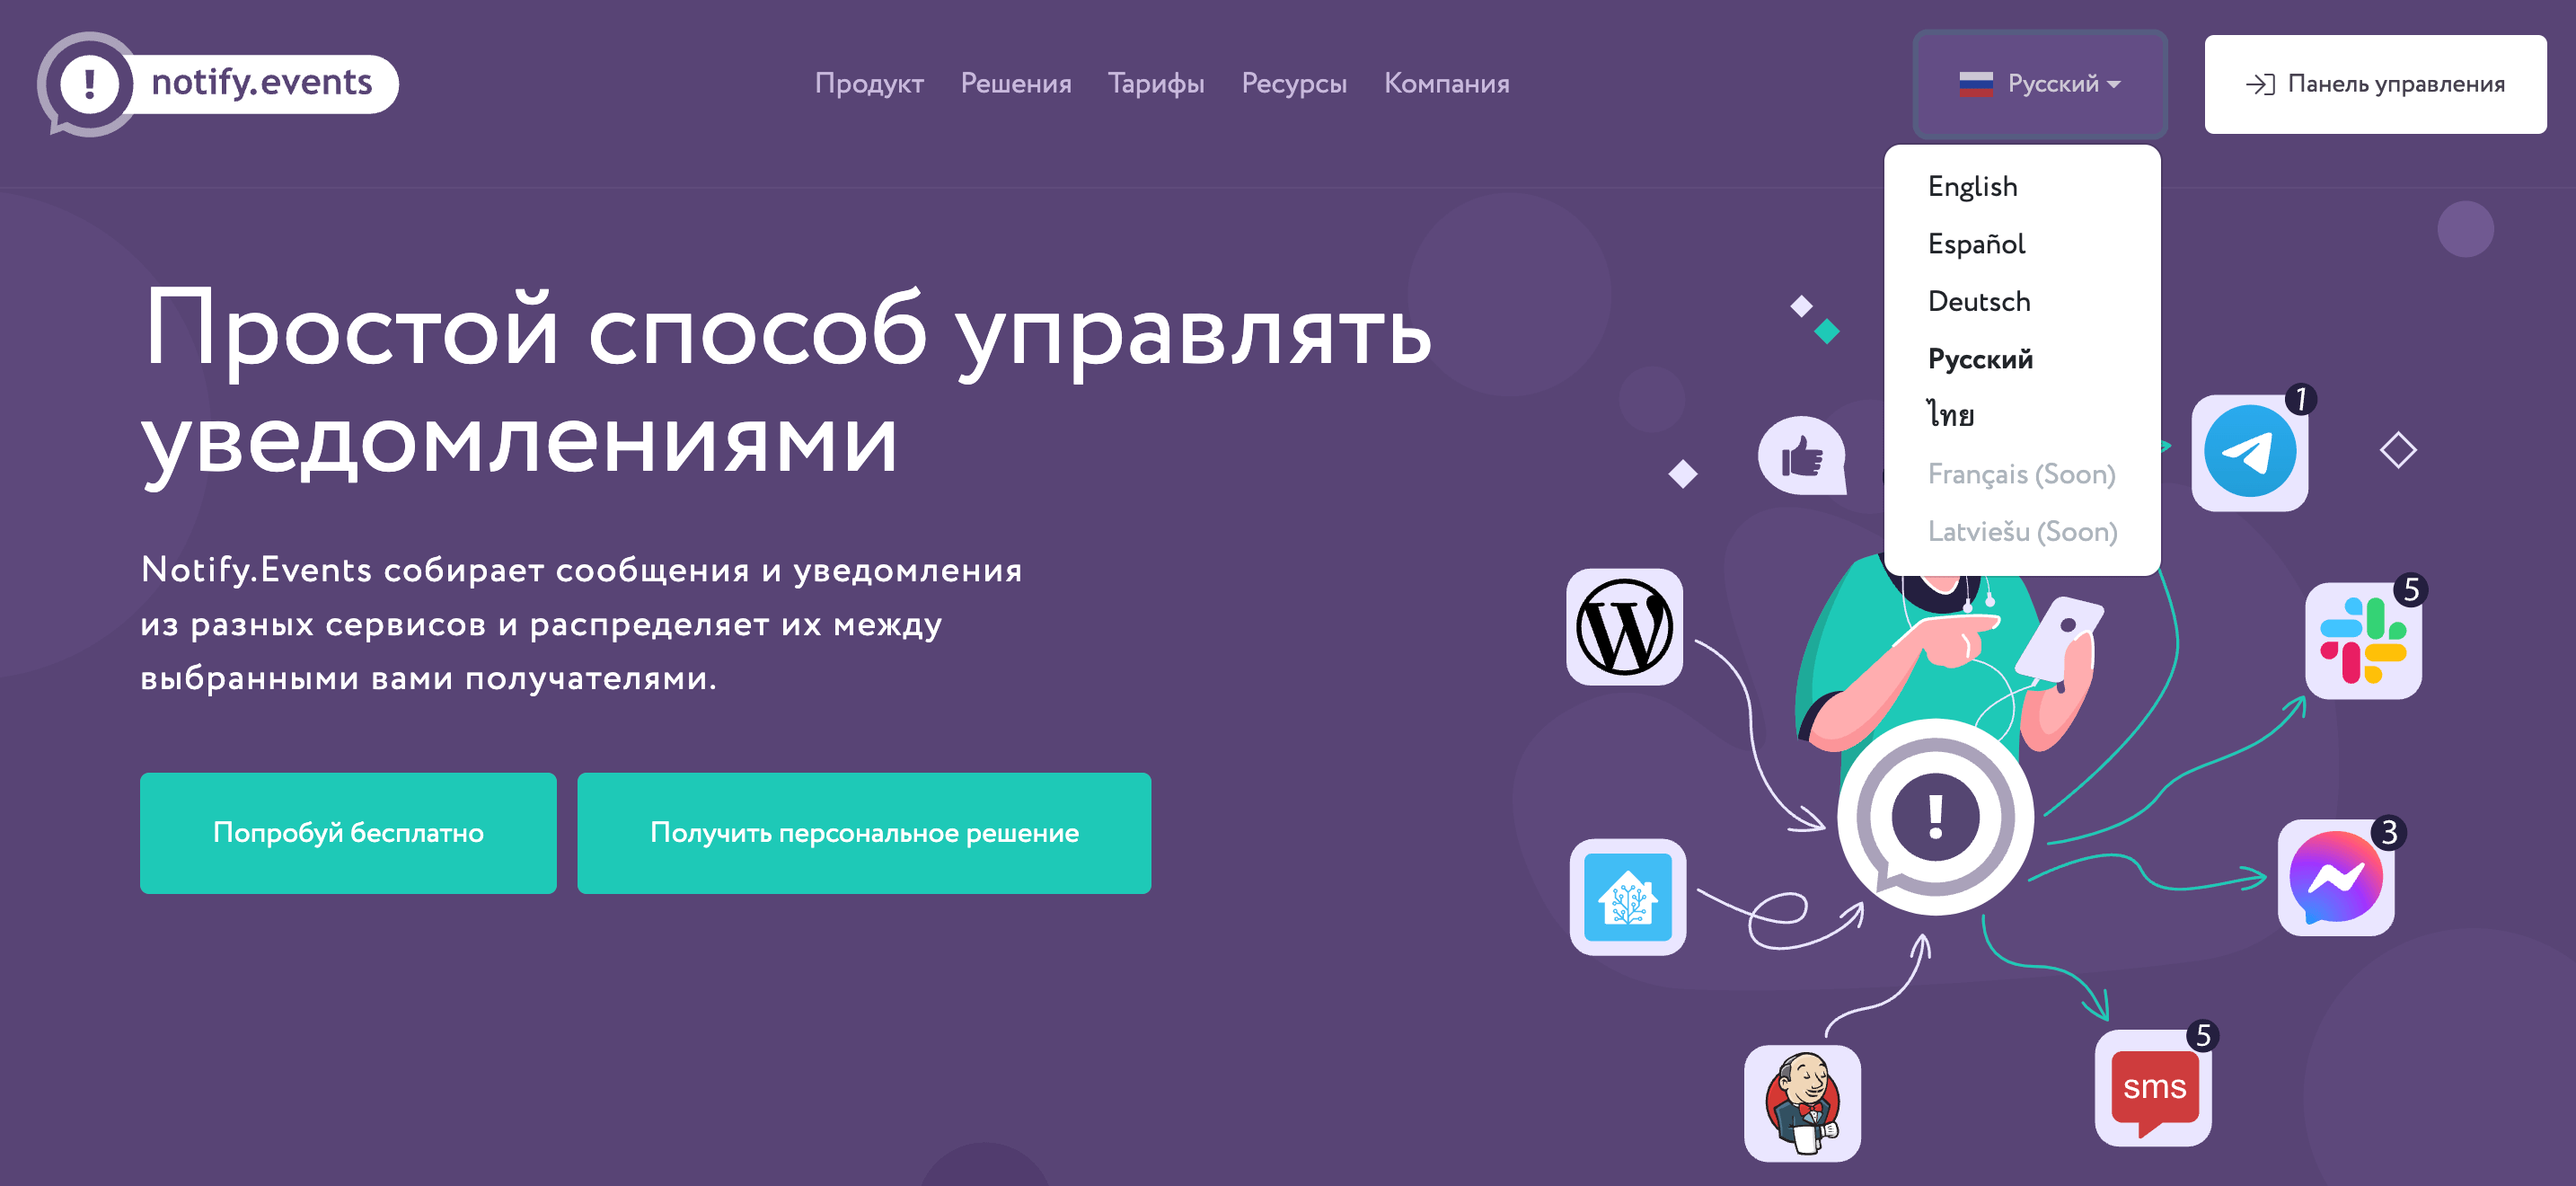 Языки Notify.Events.png